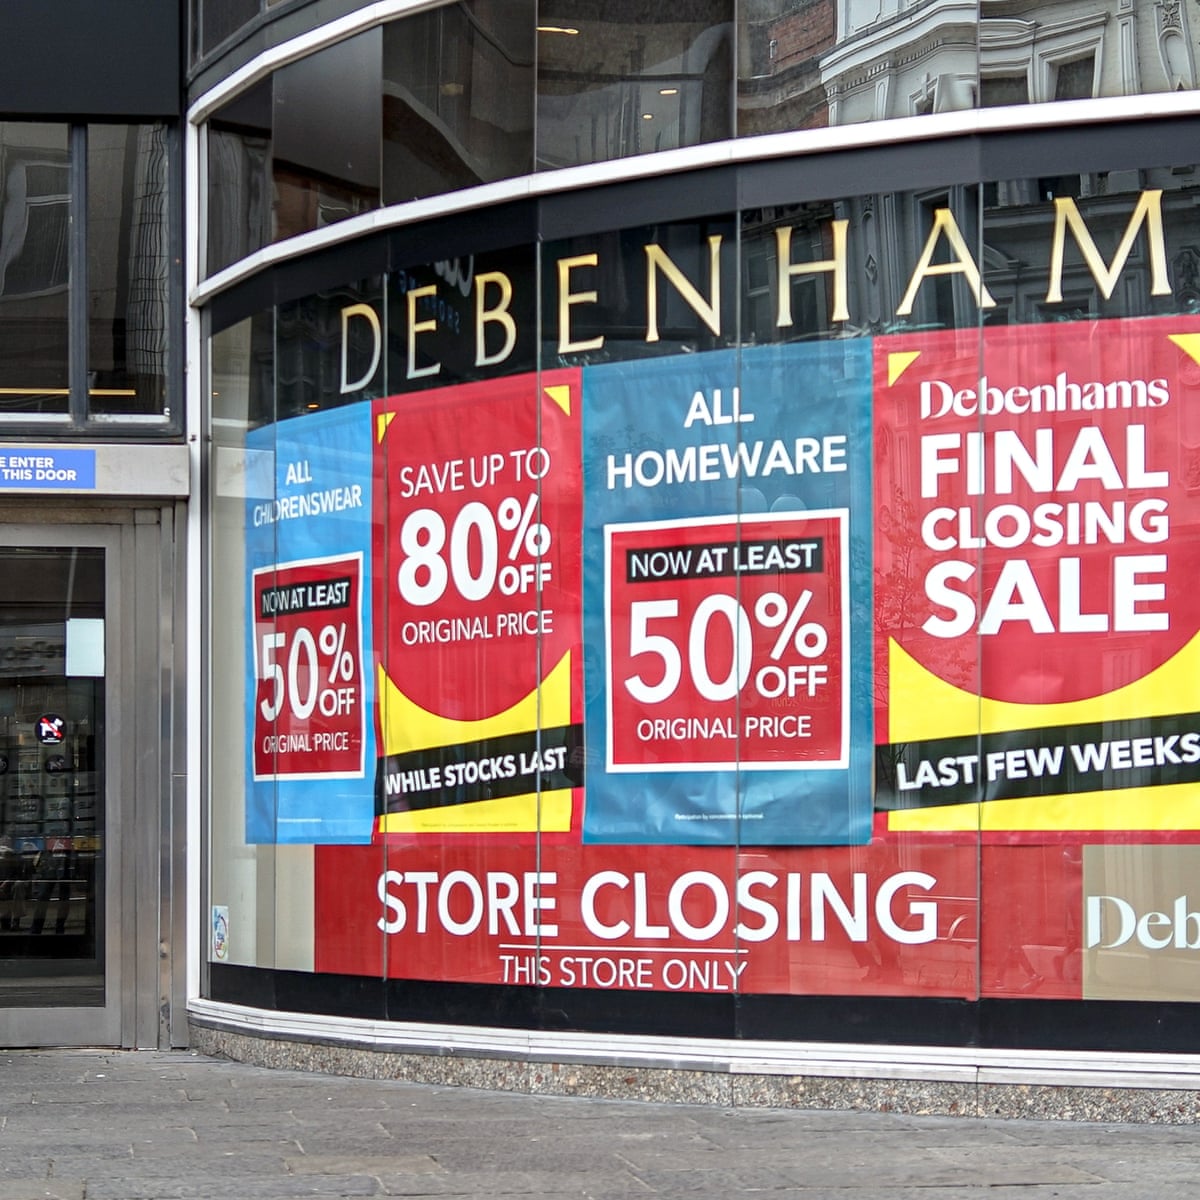 Tell us: how do you feel about Debenhams closing its stores